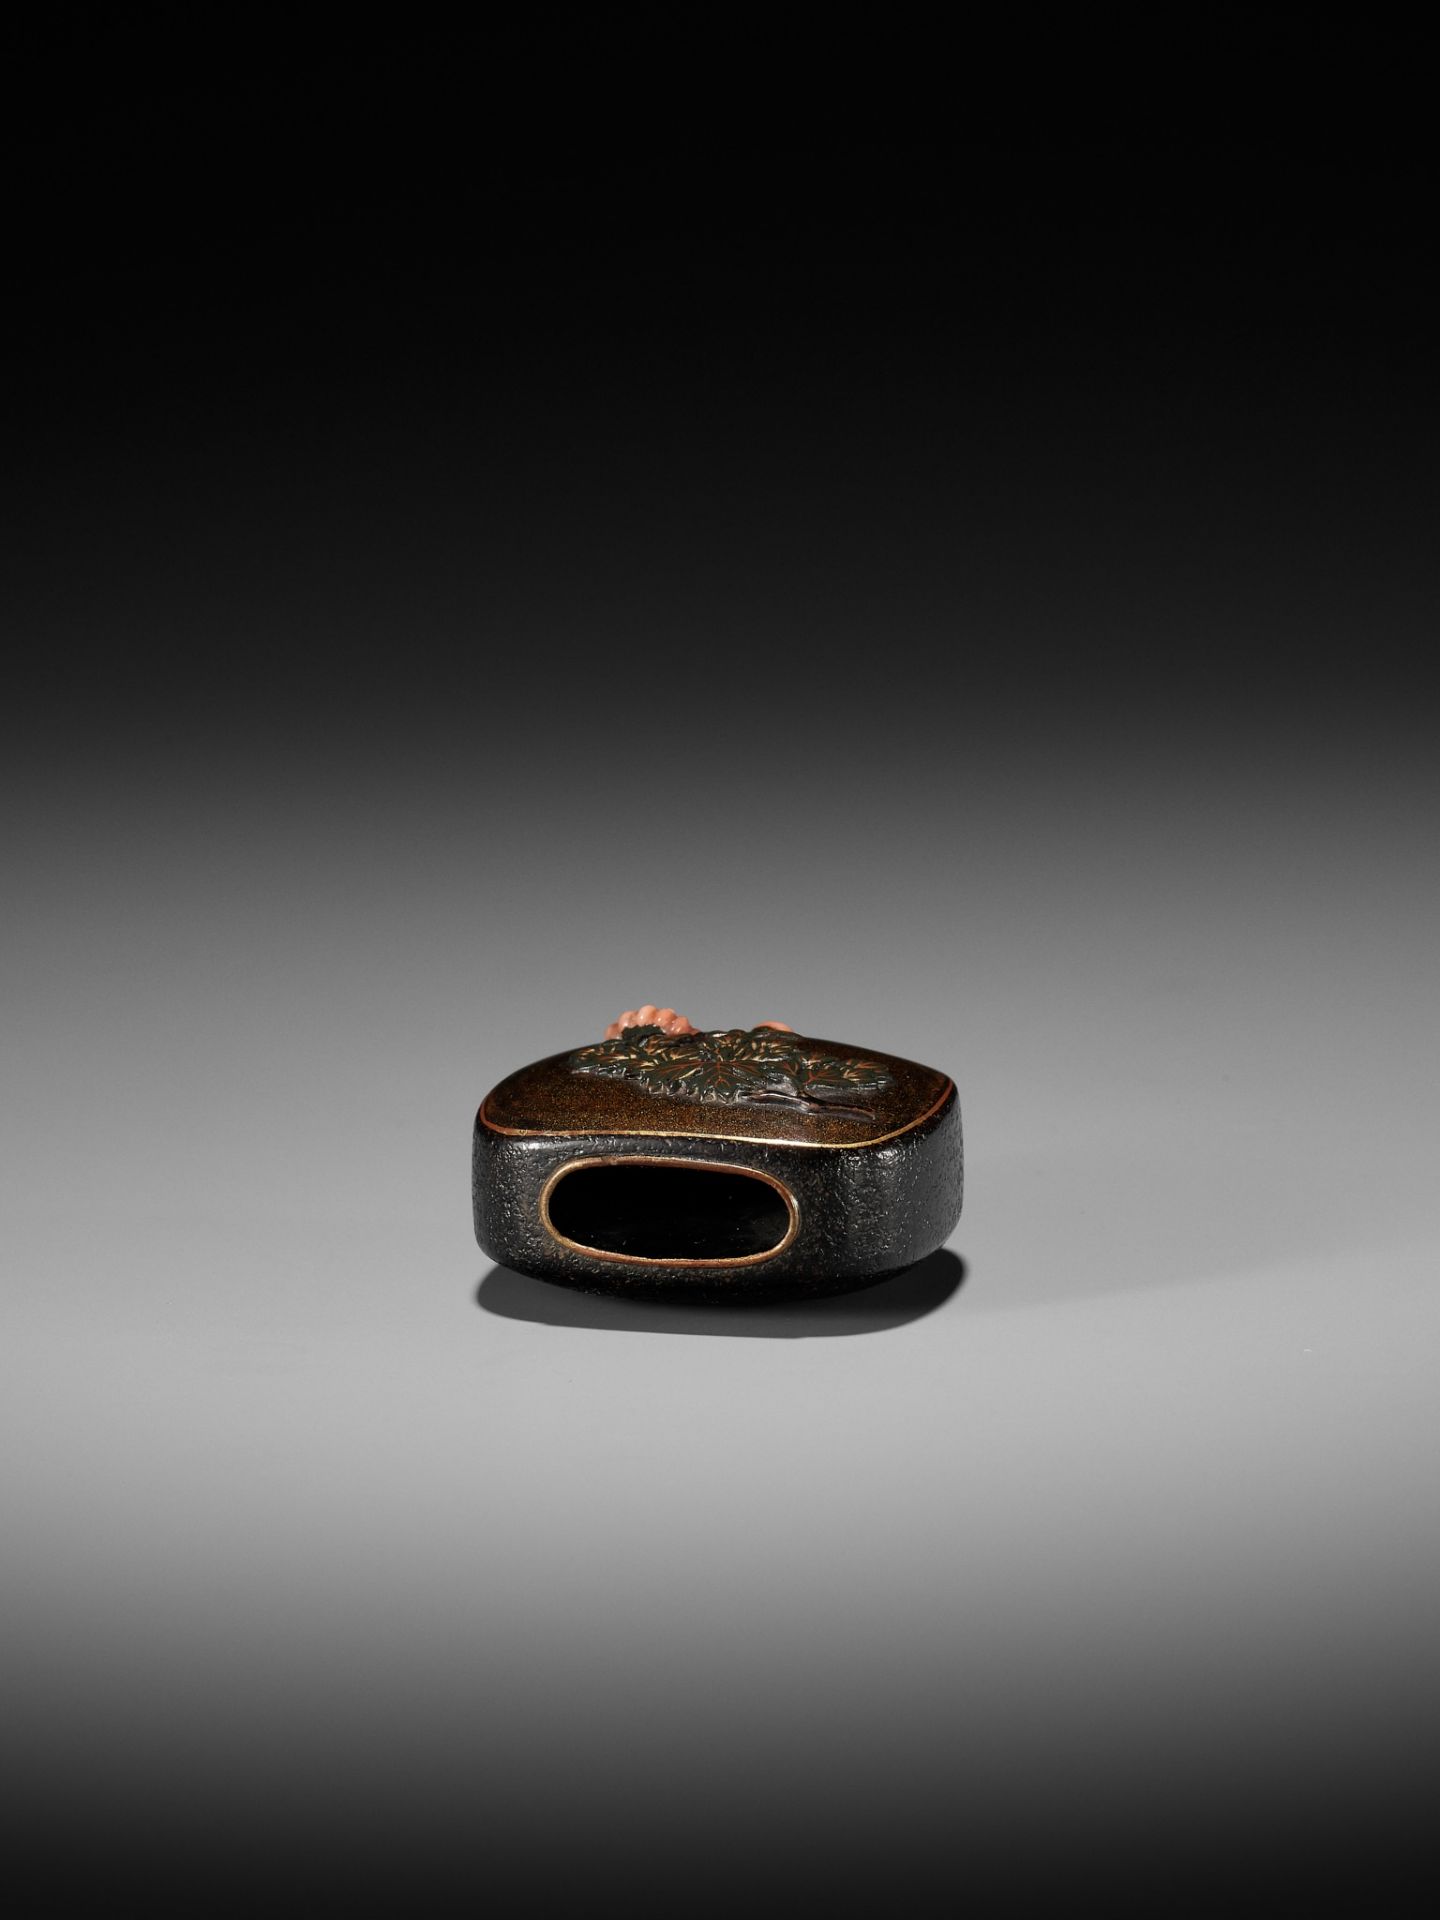 A RARE AND UNUSUAL LACQUER NETSUKE WITH FLORAL DESIGN - Image 8 of 10